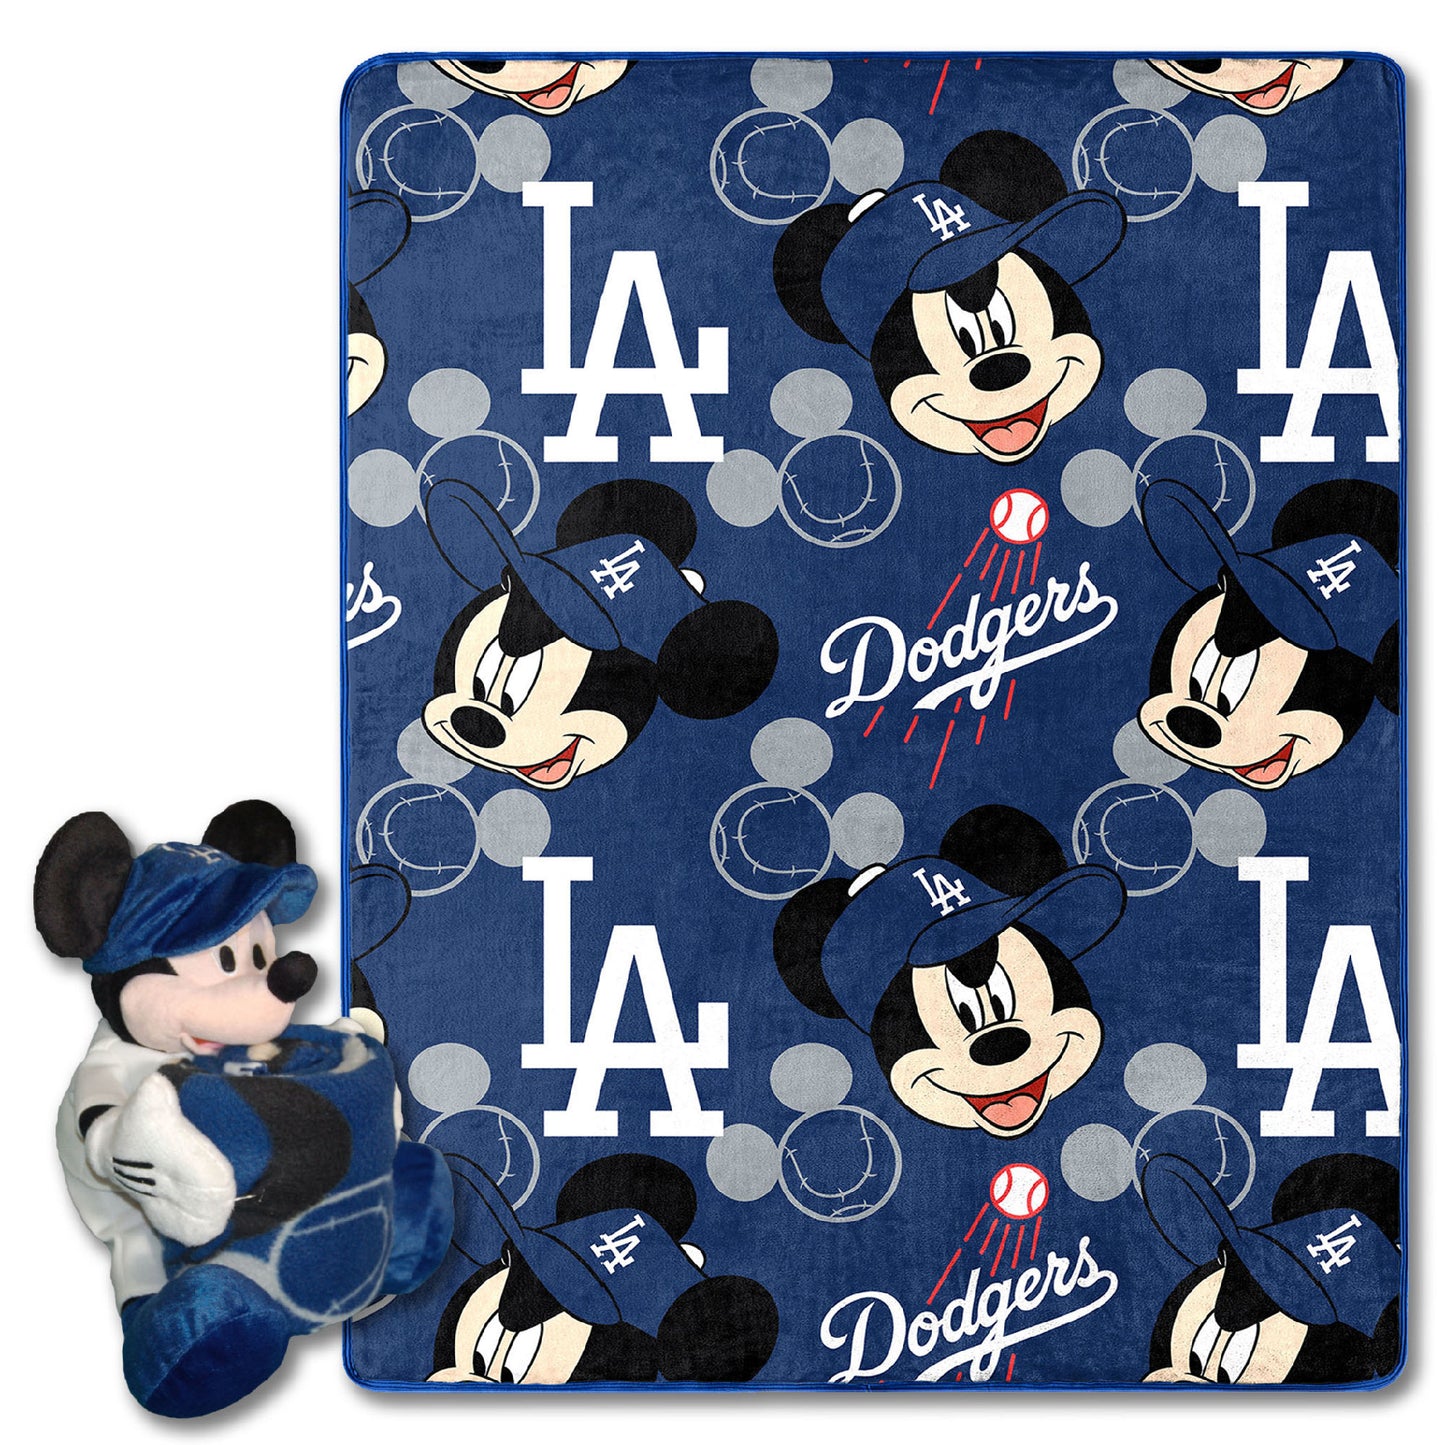 Dodgers OFFICIAL MLB & Disney's Mickey Mouse Character Hugger Pillow & Silk Touch Throw Set;  40" x 50"